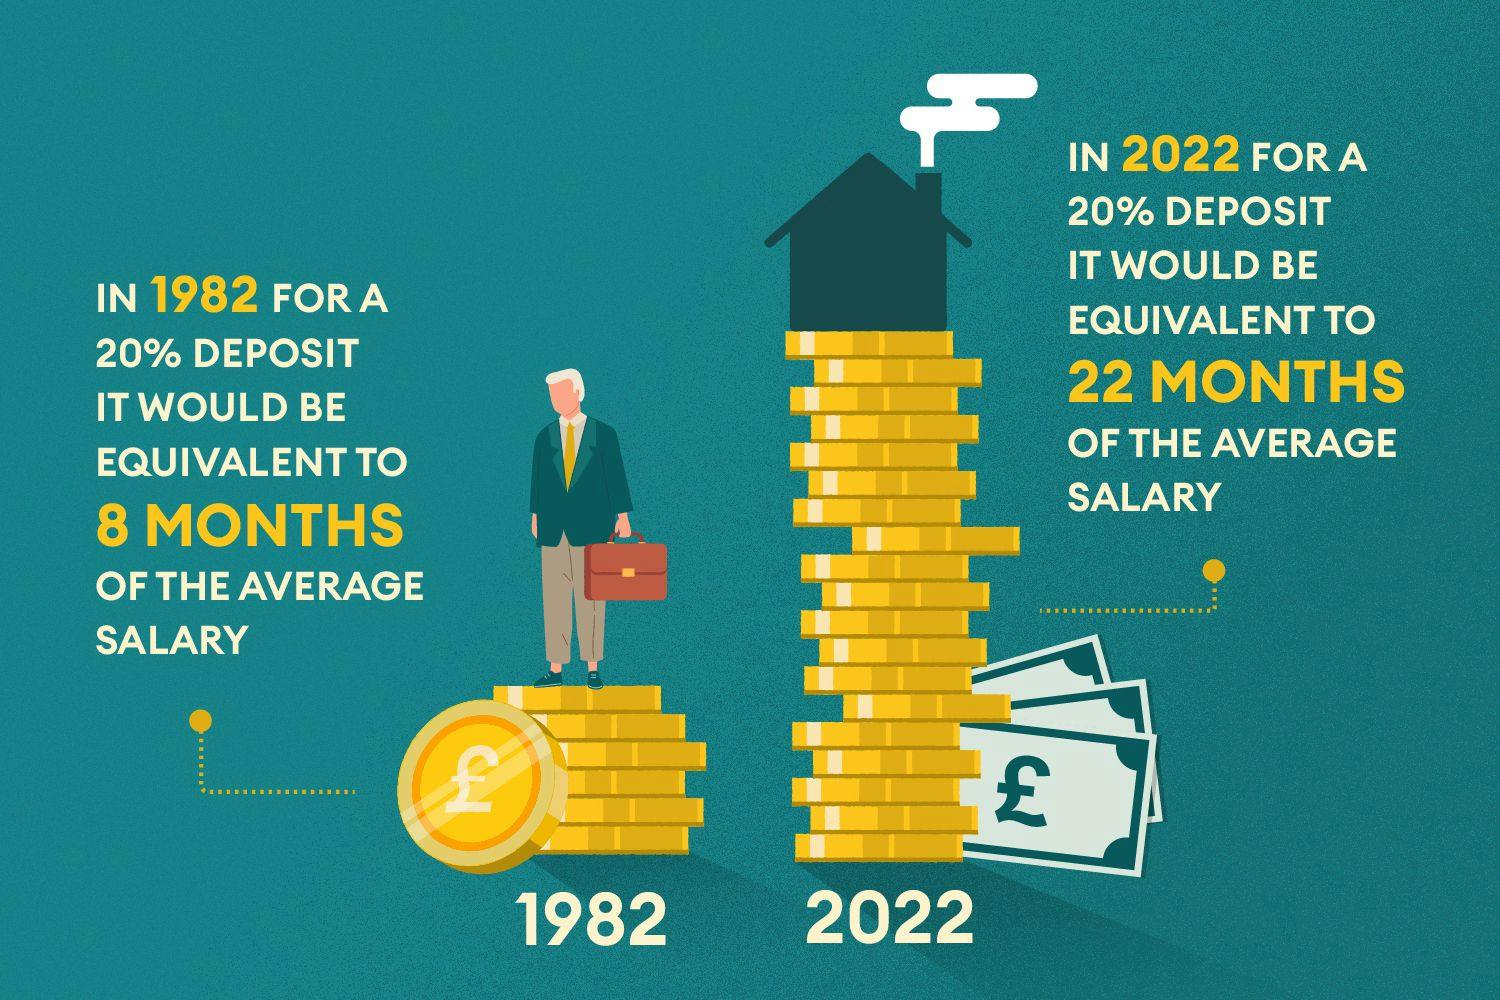 Illustration showing the difference between salaries in 1982 and 2022 for saving for a deposit. Illustration depicts a man standing on one pile of coins on the left and on the right a. much higher stack with a house on top. 